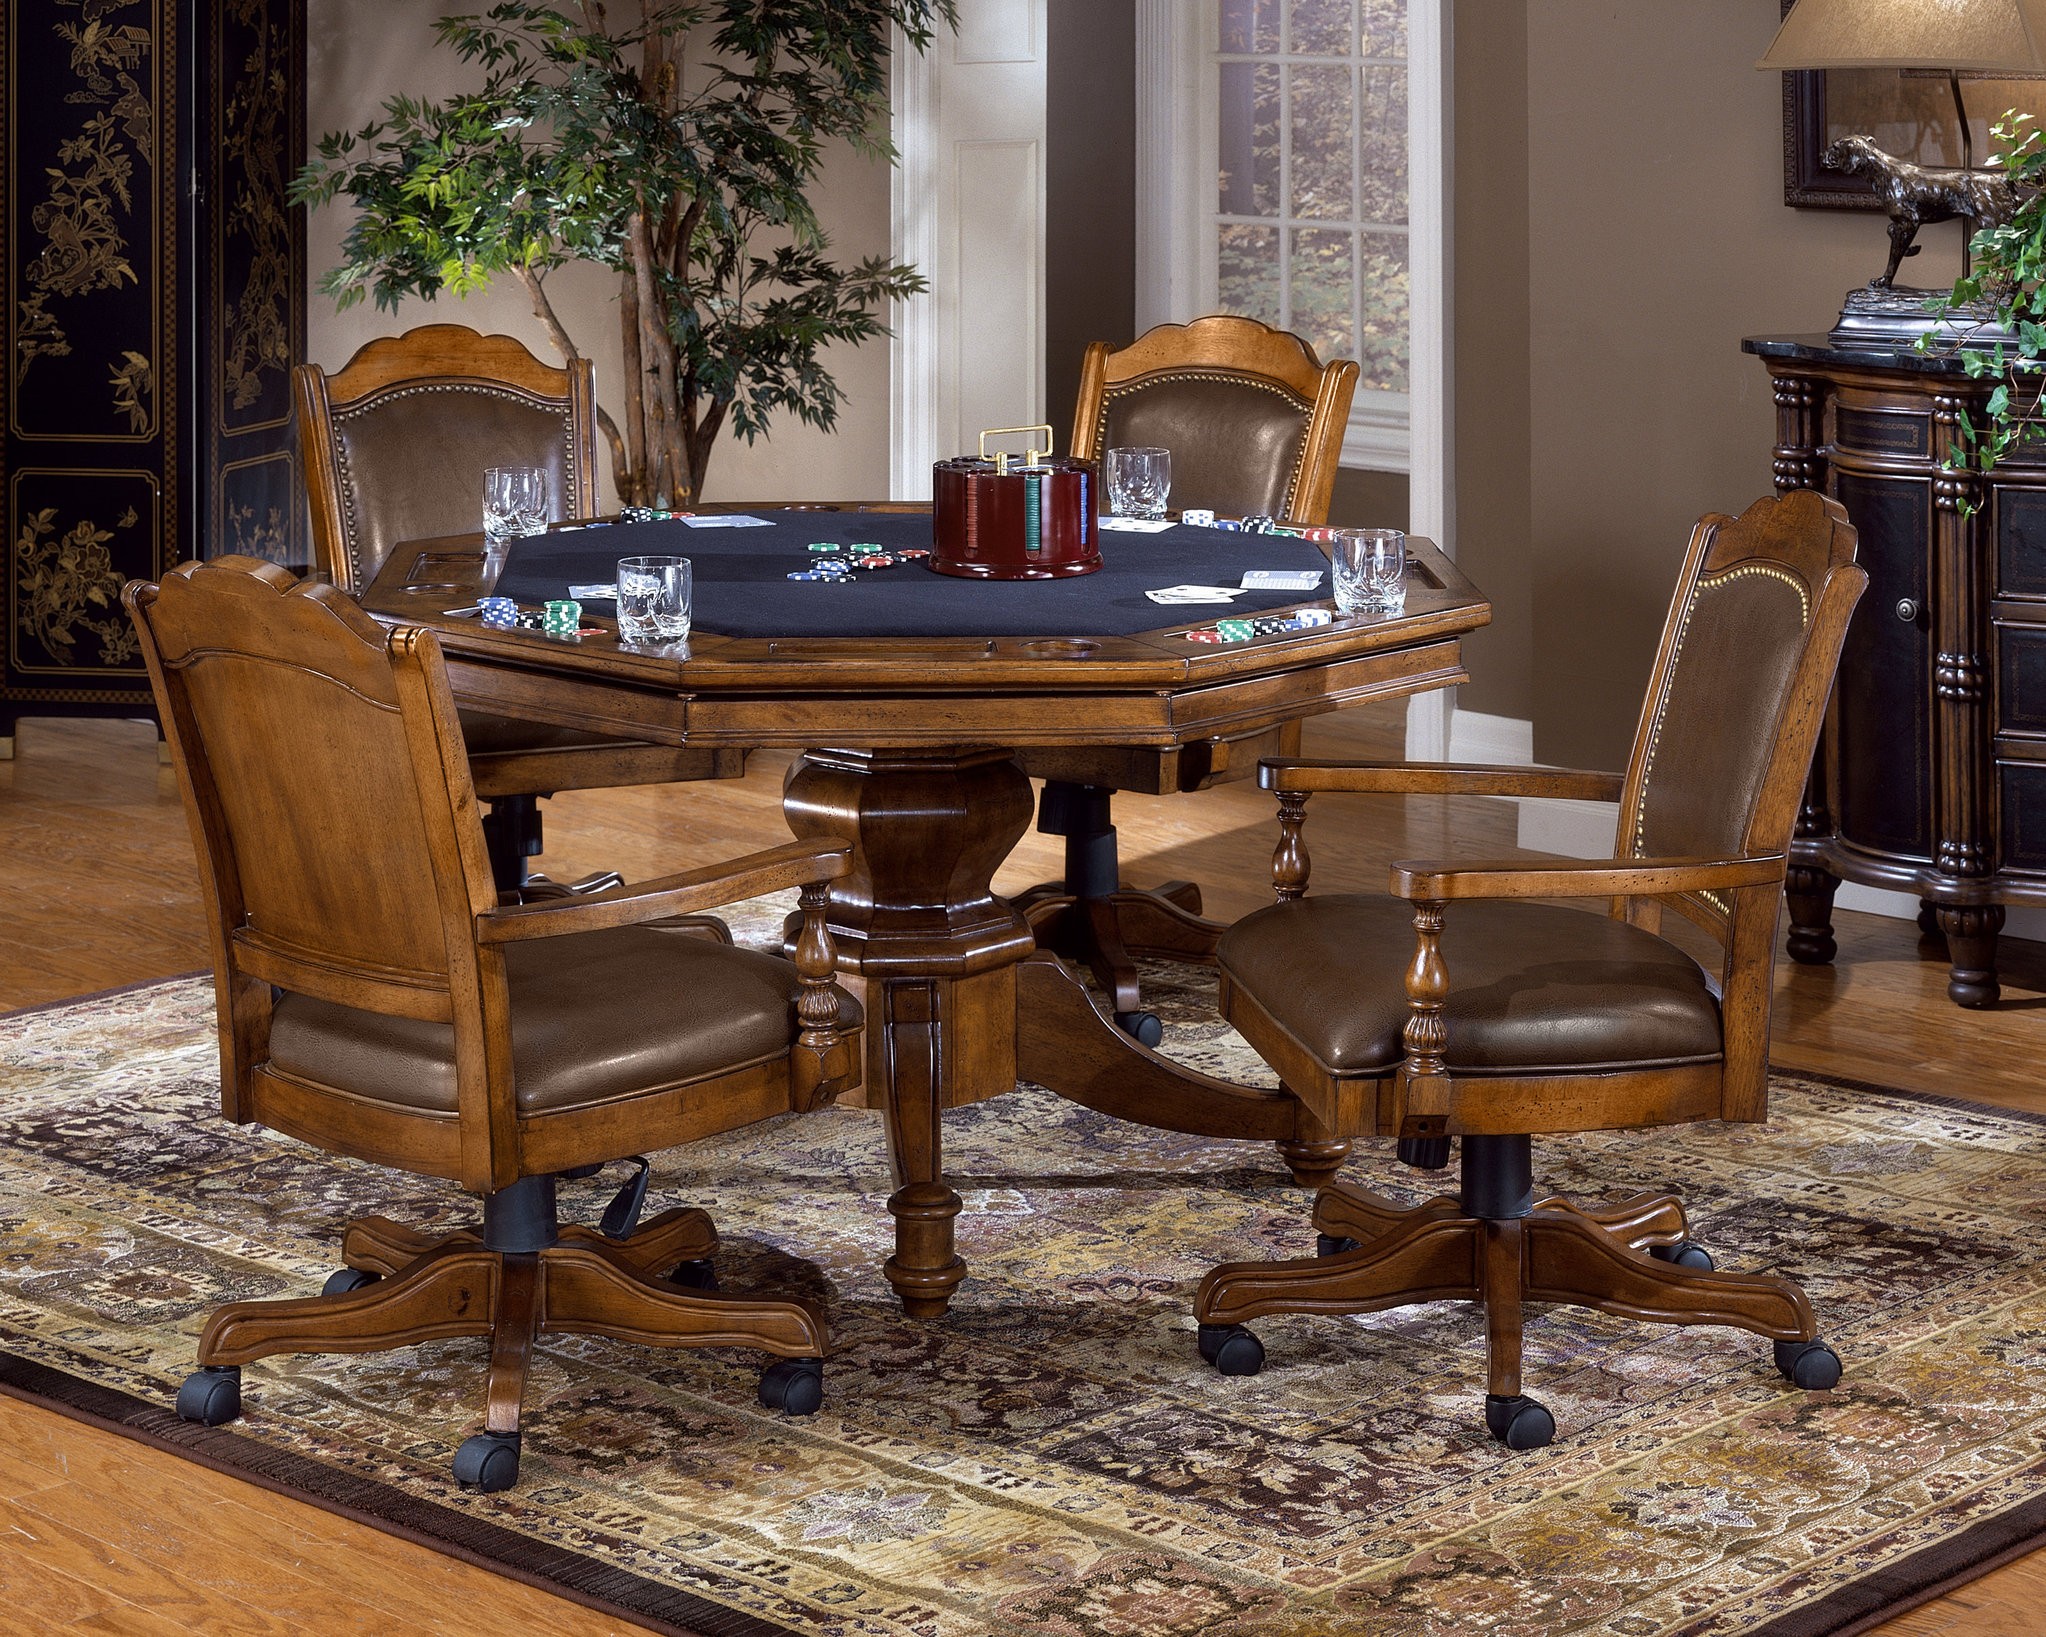 Poker table with leather back game chairs classic wood